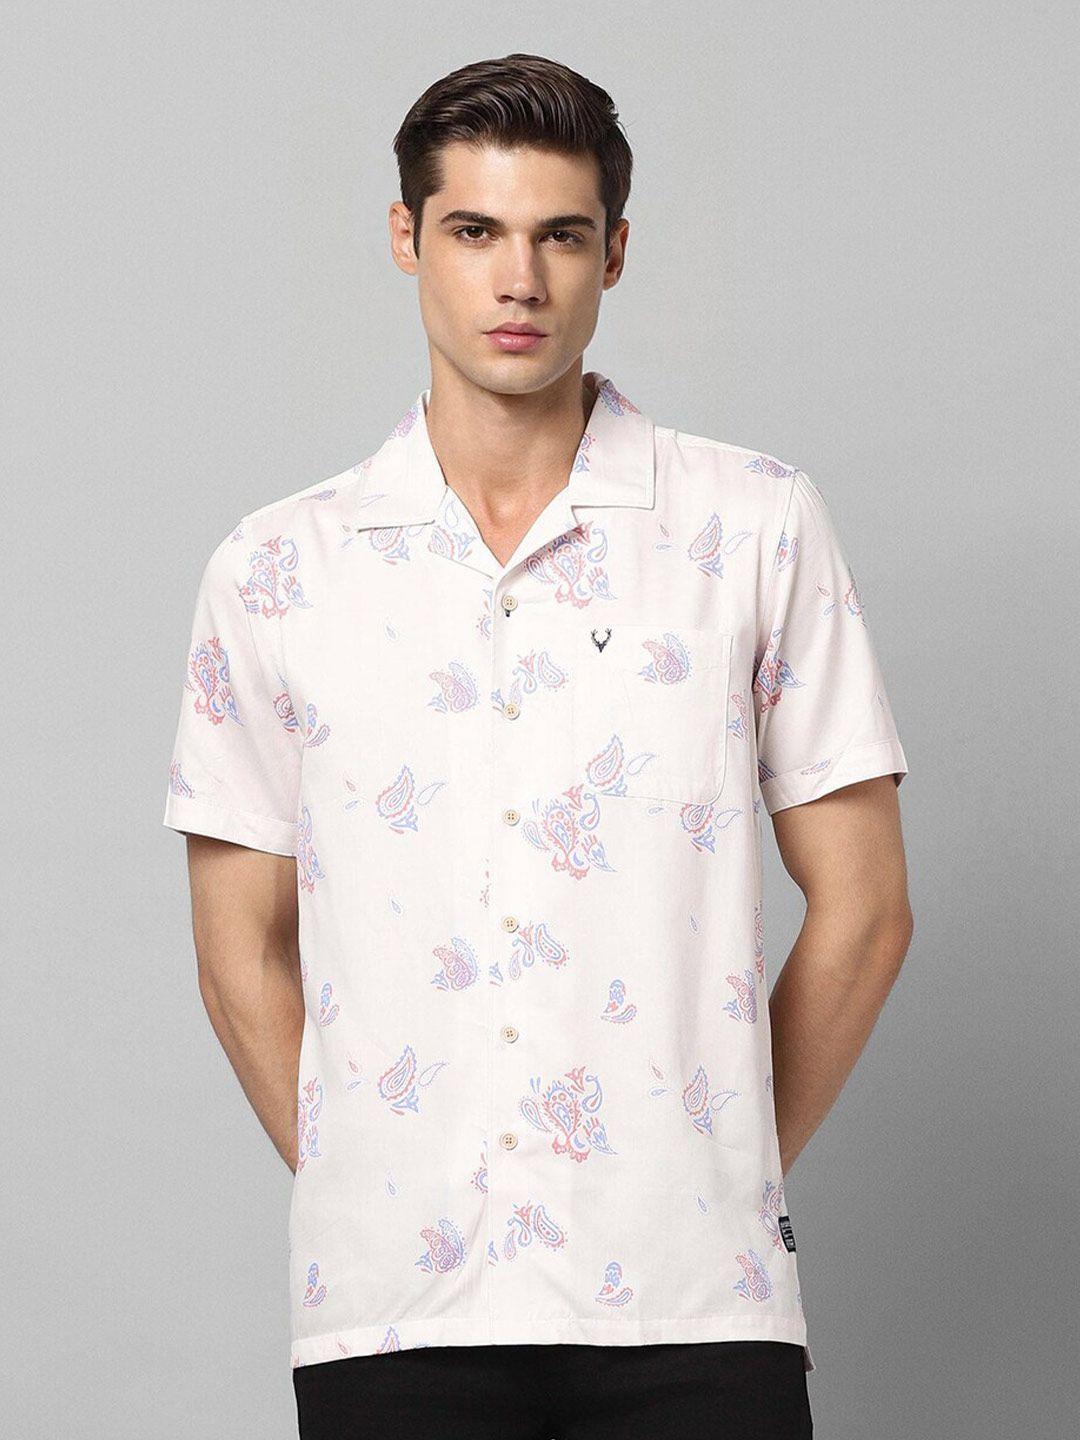 allen solly floral printed casual shirt